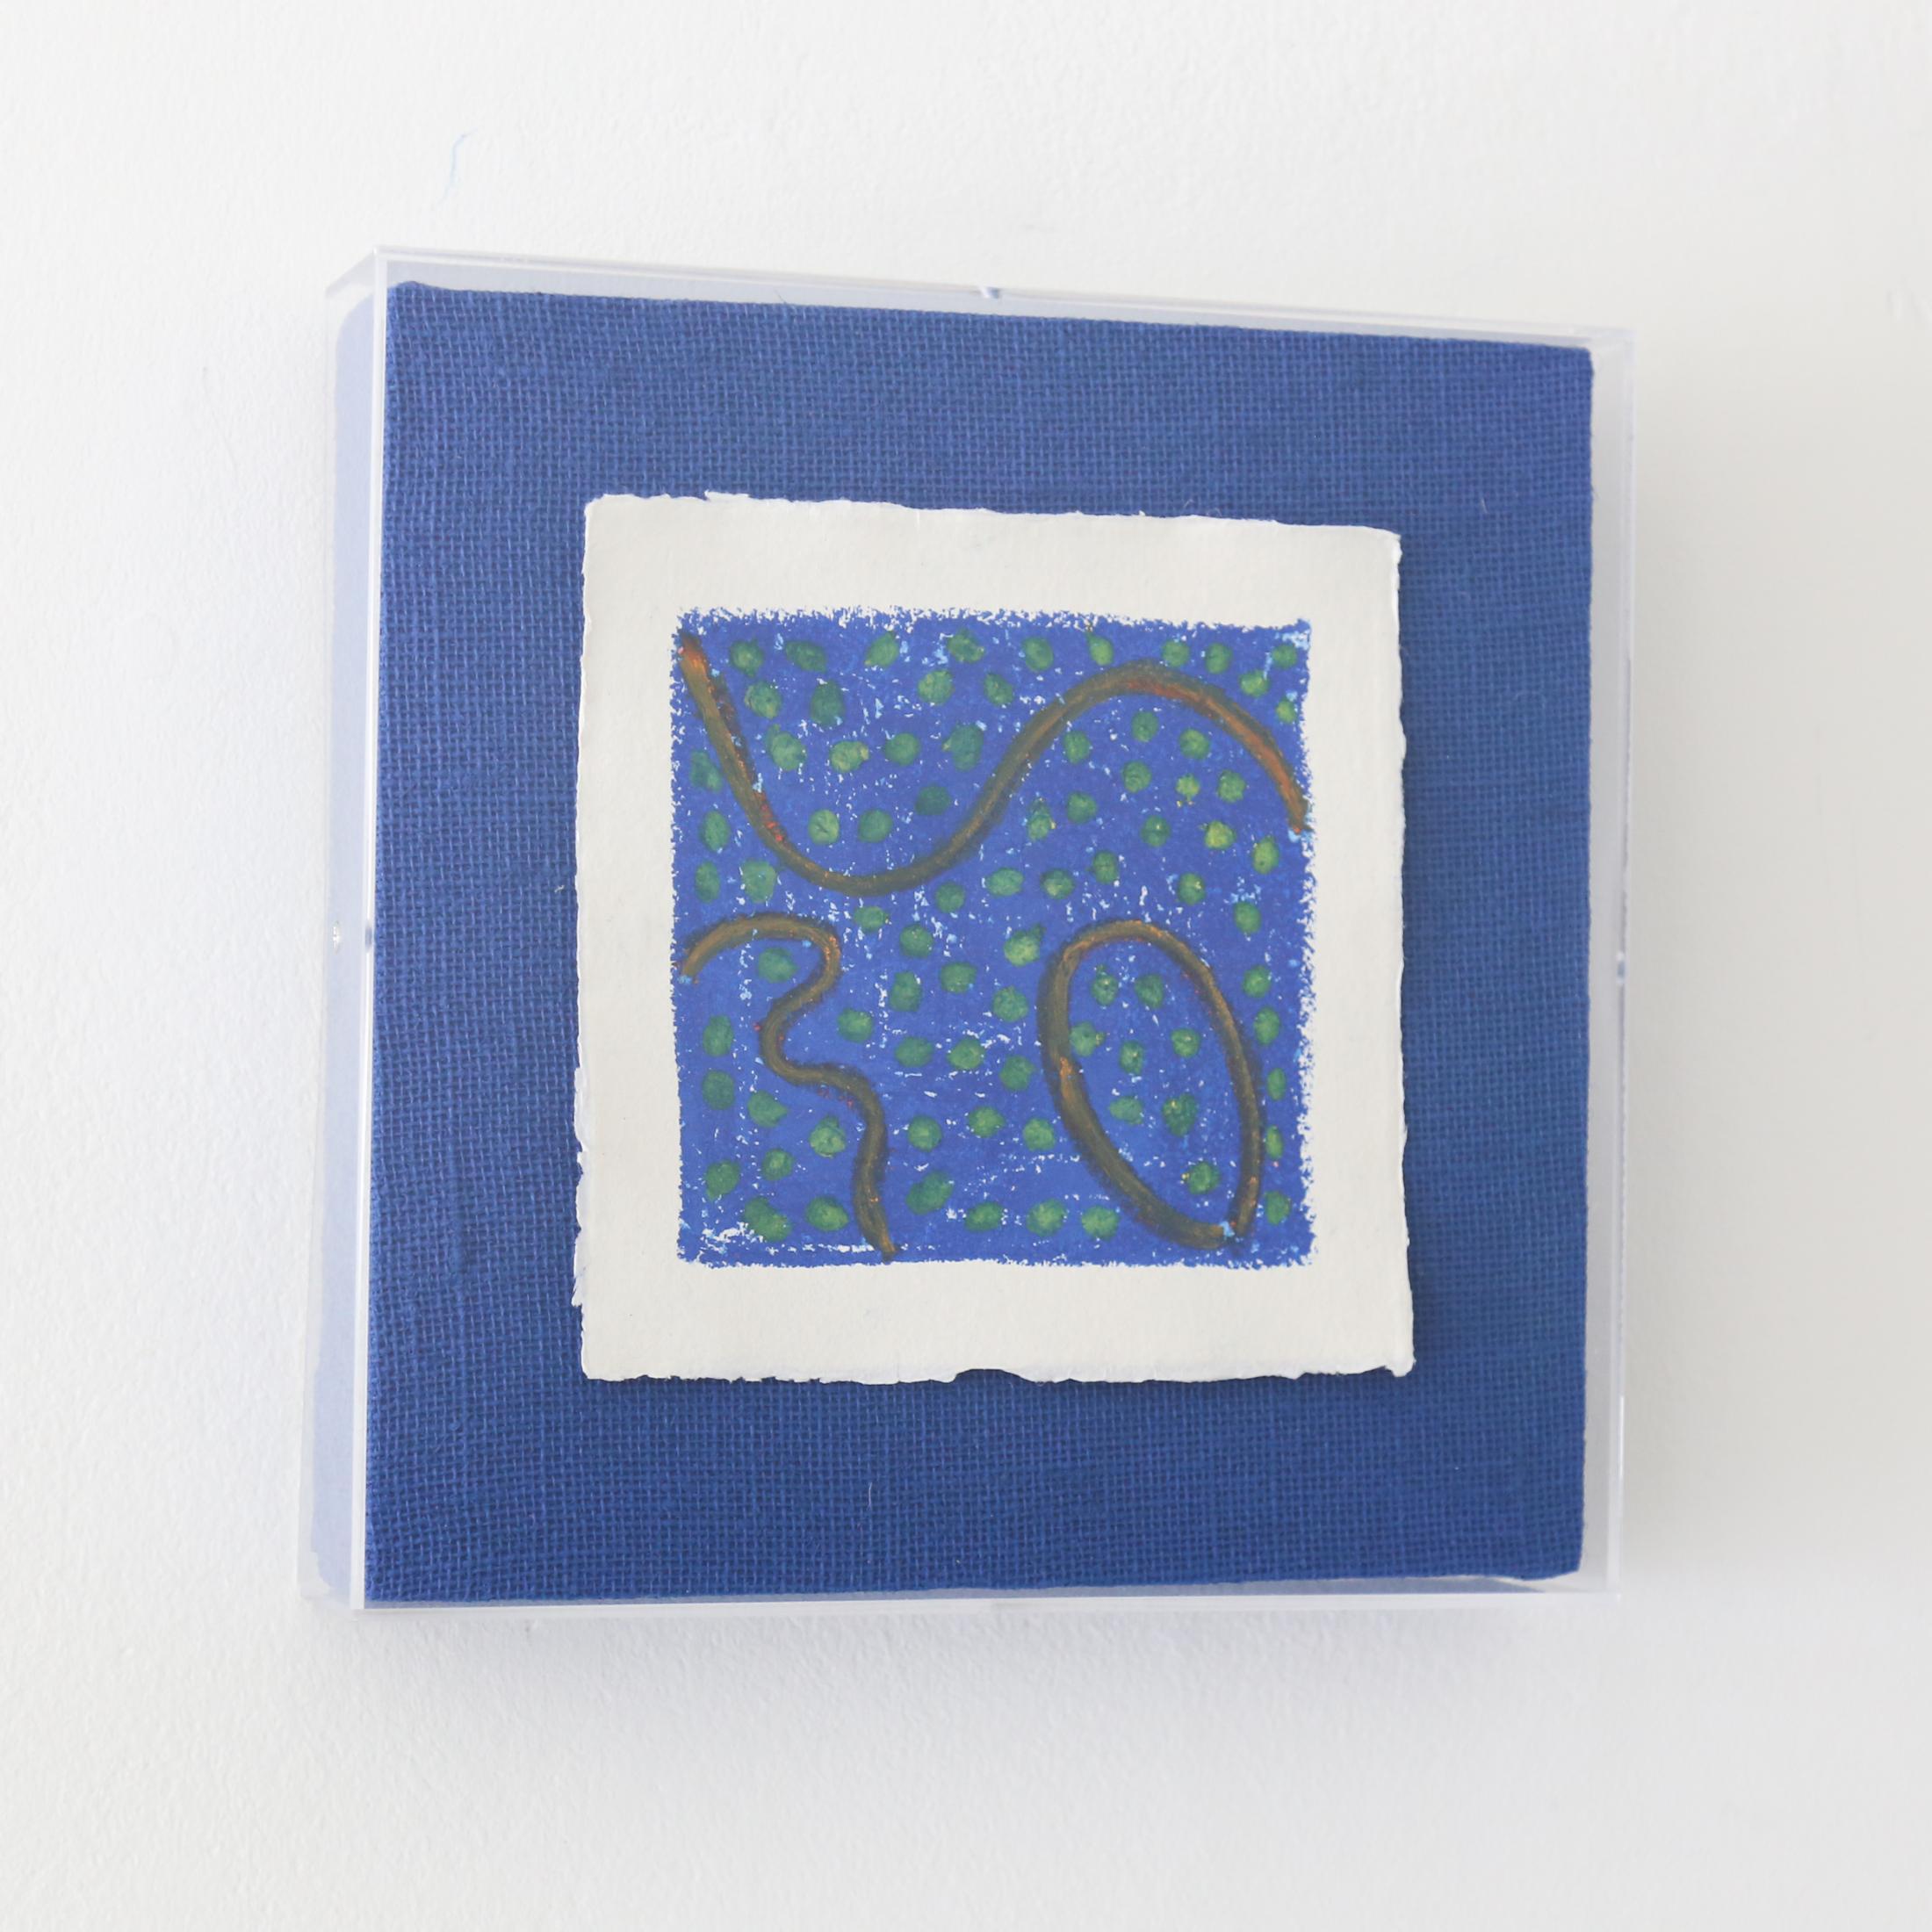 Kim Fonder, SHIZEN SERIES I, Mixed Media on Handmade Paper with Plexi, 12.00 X 12.00 in, $600.00, Blue
White, Abstract, works on paper

Kim Fonder loves texture and touch. Her paintings and furniture reflect her infatuation with these two